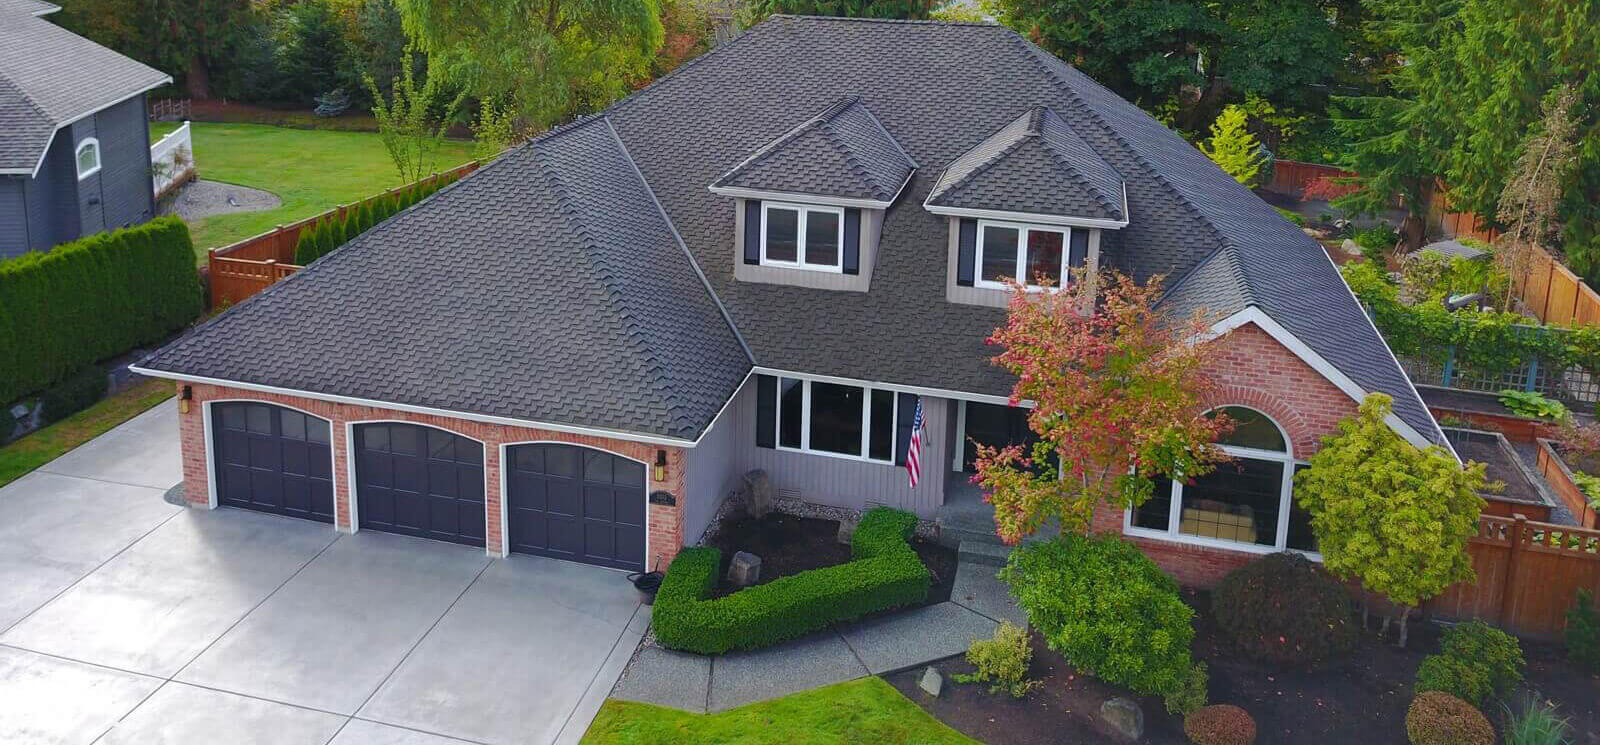 Schedule Your Professional Roof Inspection with DT Roofing Today